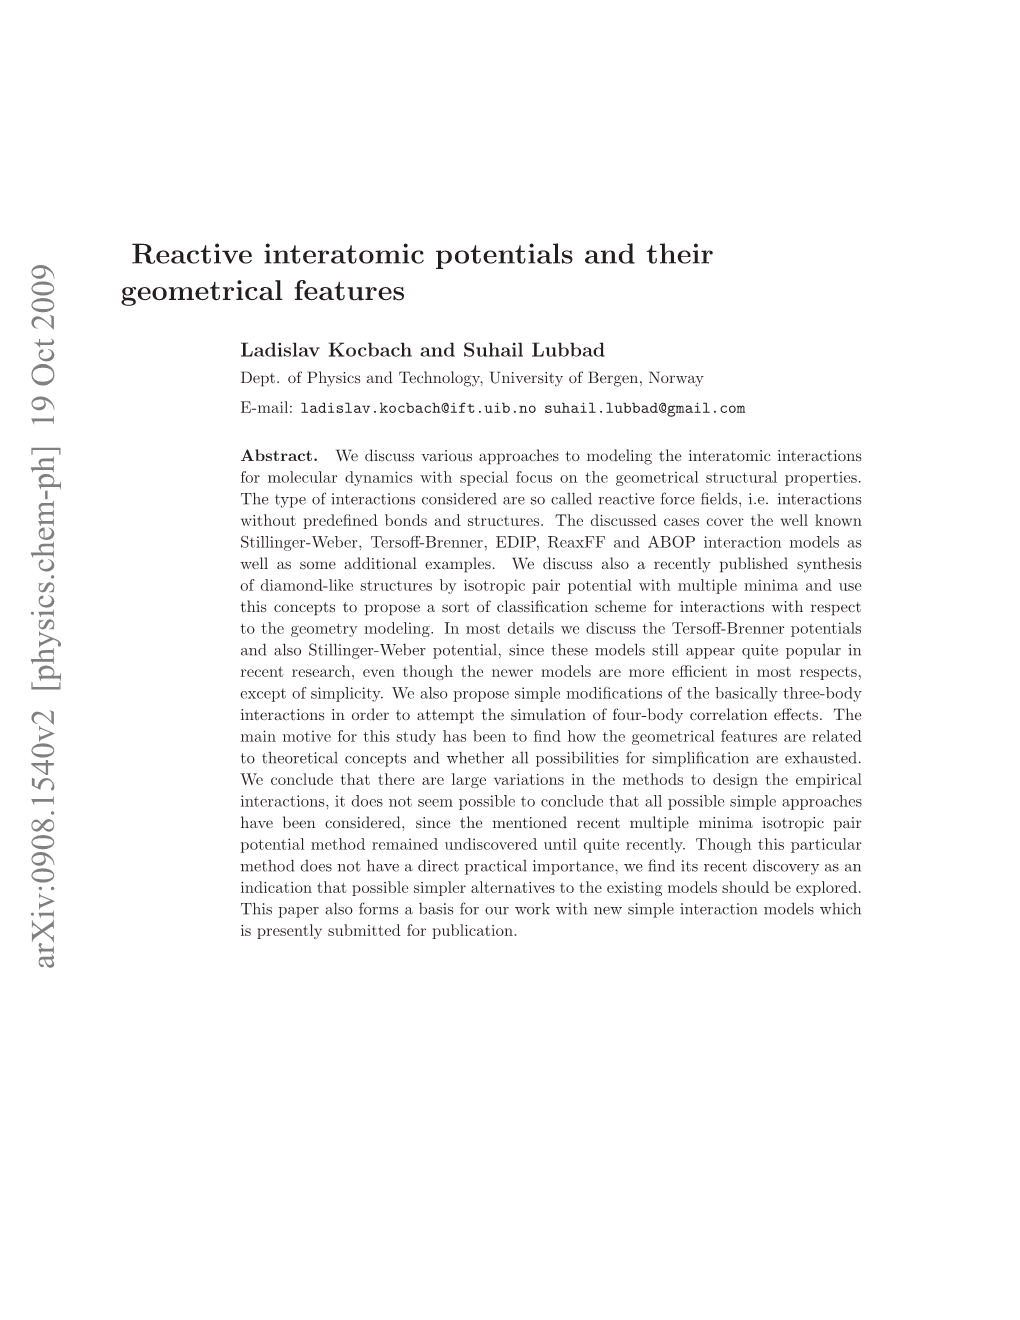 Reactive Interatomic Potentials and Their Geometrical Features